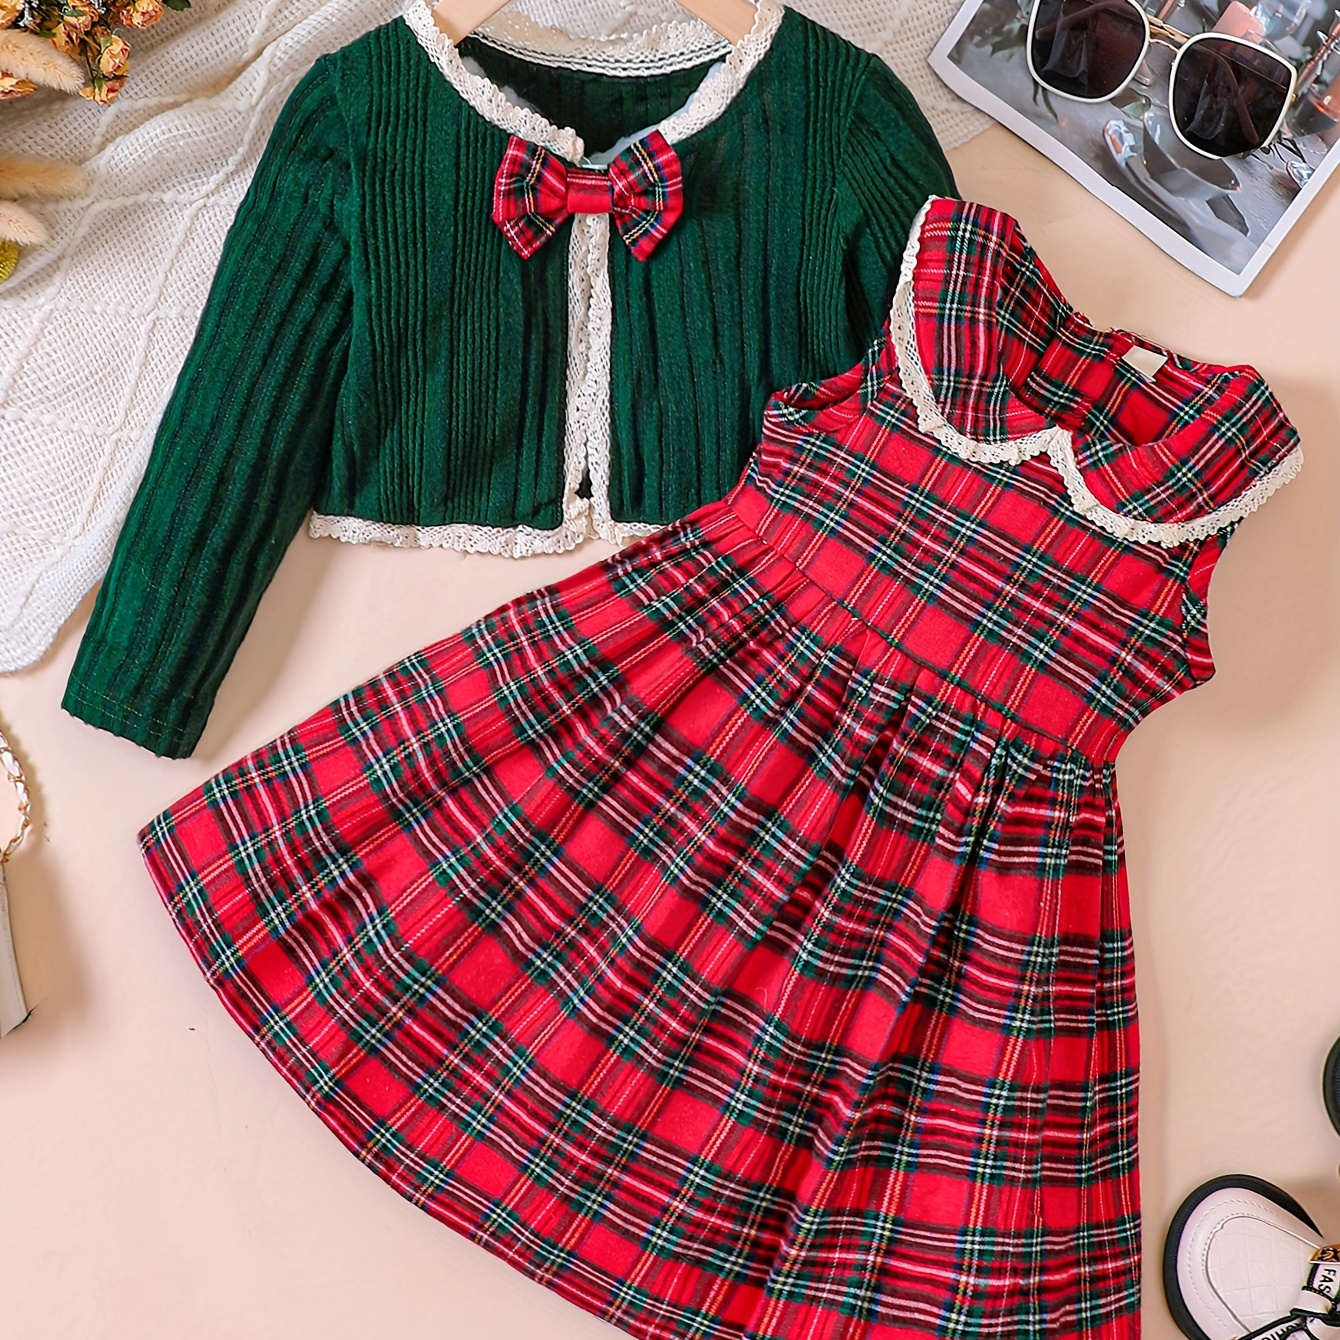 

Girls 2pcs Christmas Sets Ribbed Knit Cardigan With Bow & Plaid Sleeveless Collar Dress Set For Christmas, Party, Fall